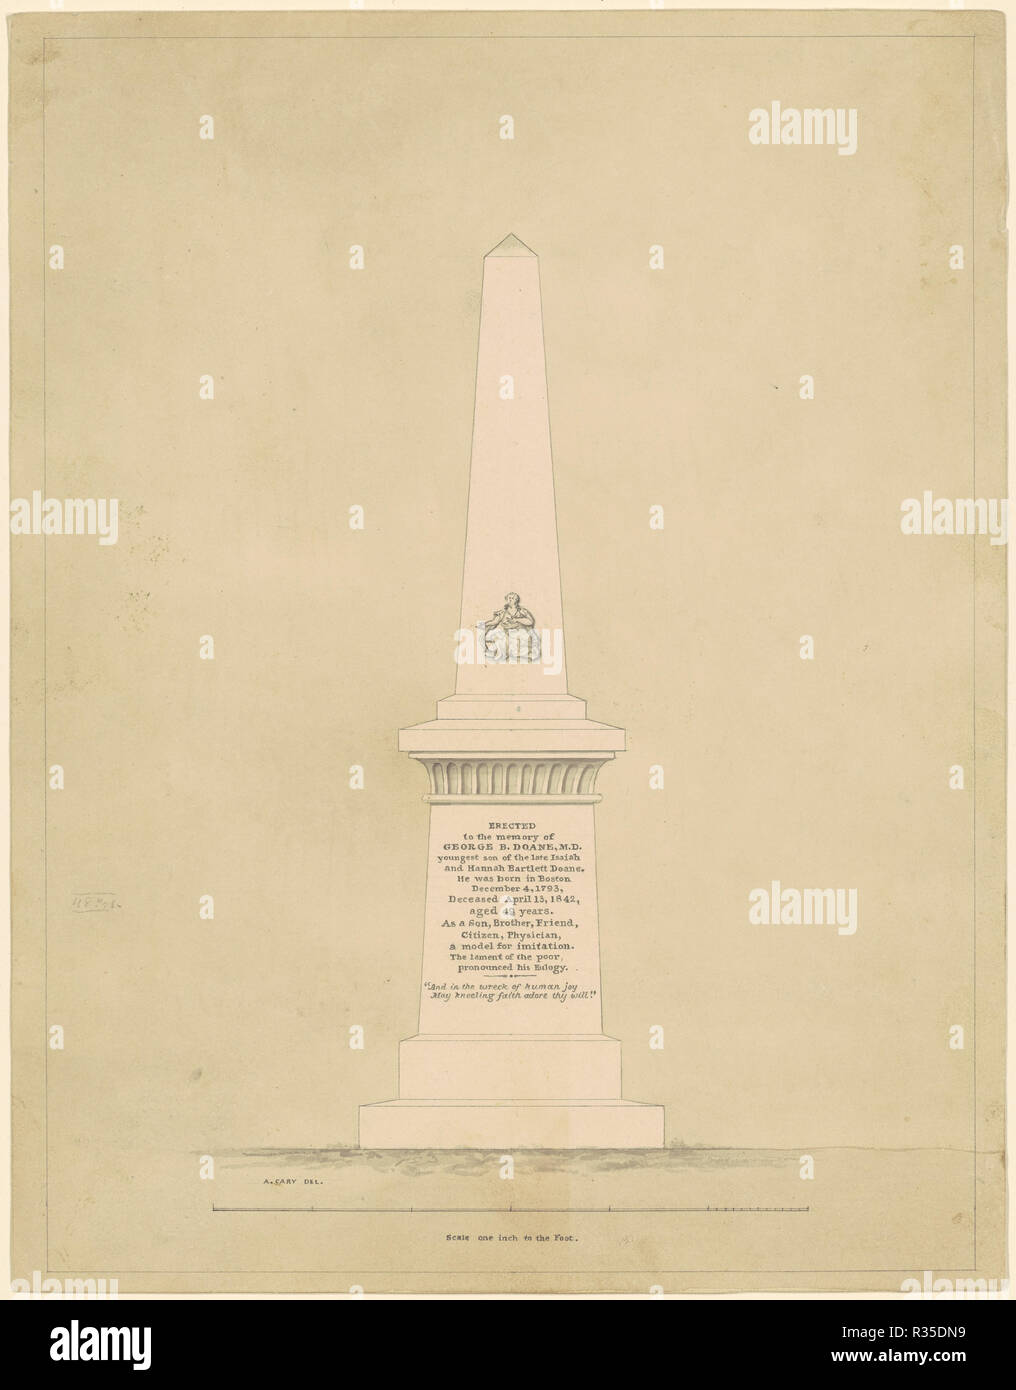 Design for a Monument in Memory of George B. Doane. Dated: c. 1843. Dimensions: sheet: 32.39 × 25.24 cm (12 3/4 × 9 15/16 in.). Medium: pen and black ink with wash on wove paper. Museum: National Gallery of Art, Washington DC. Author: Alpheus Cary. Stock Photo